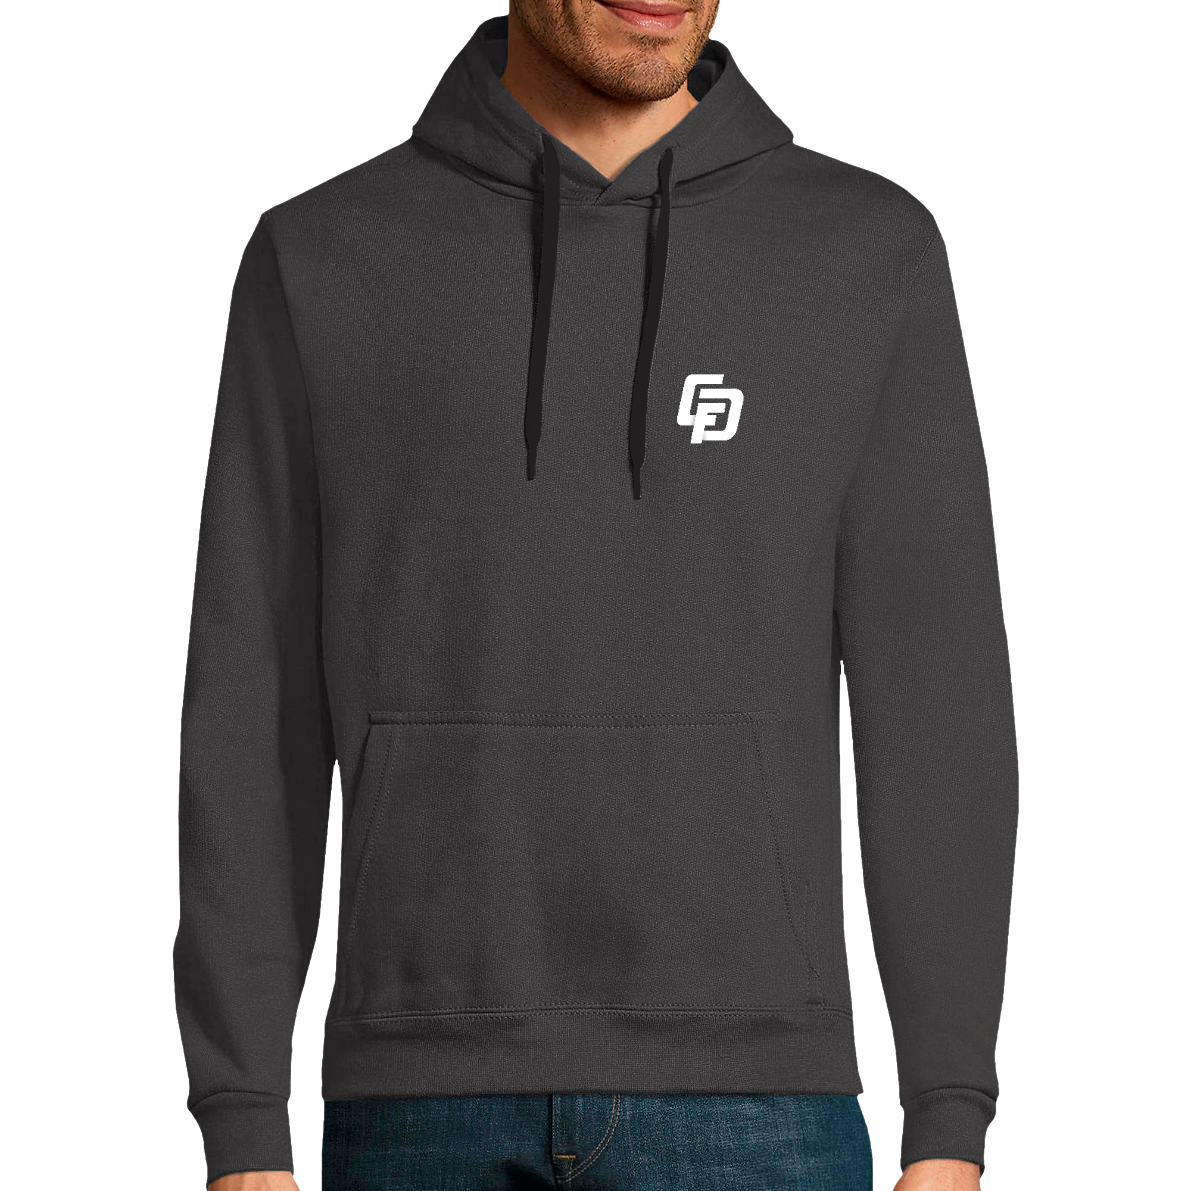 Hoodie "Calmont The French Touge"